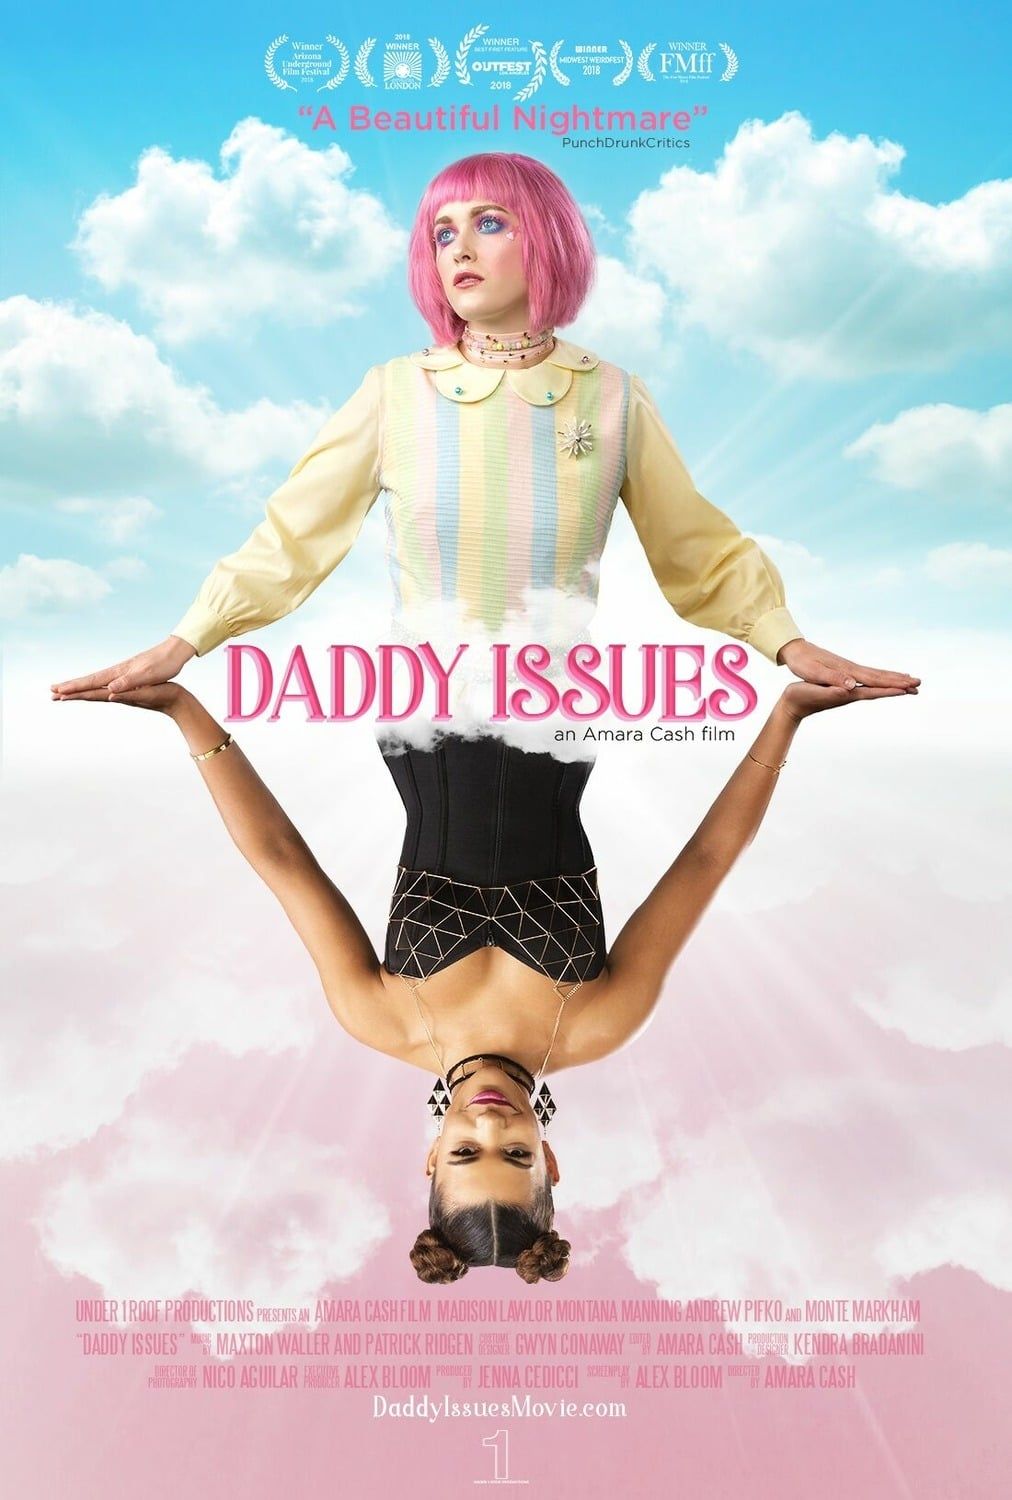 jour du Daddy issues